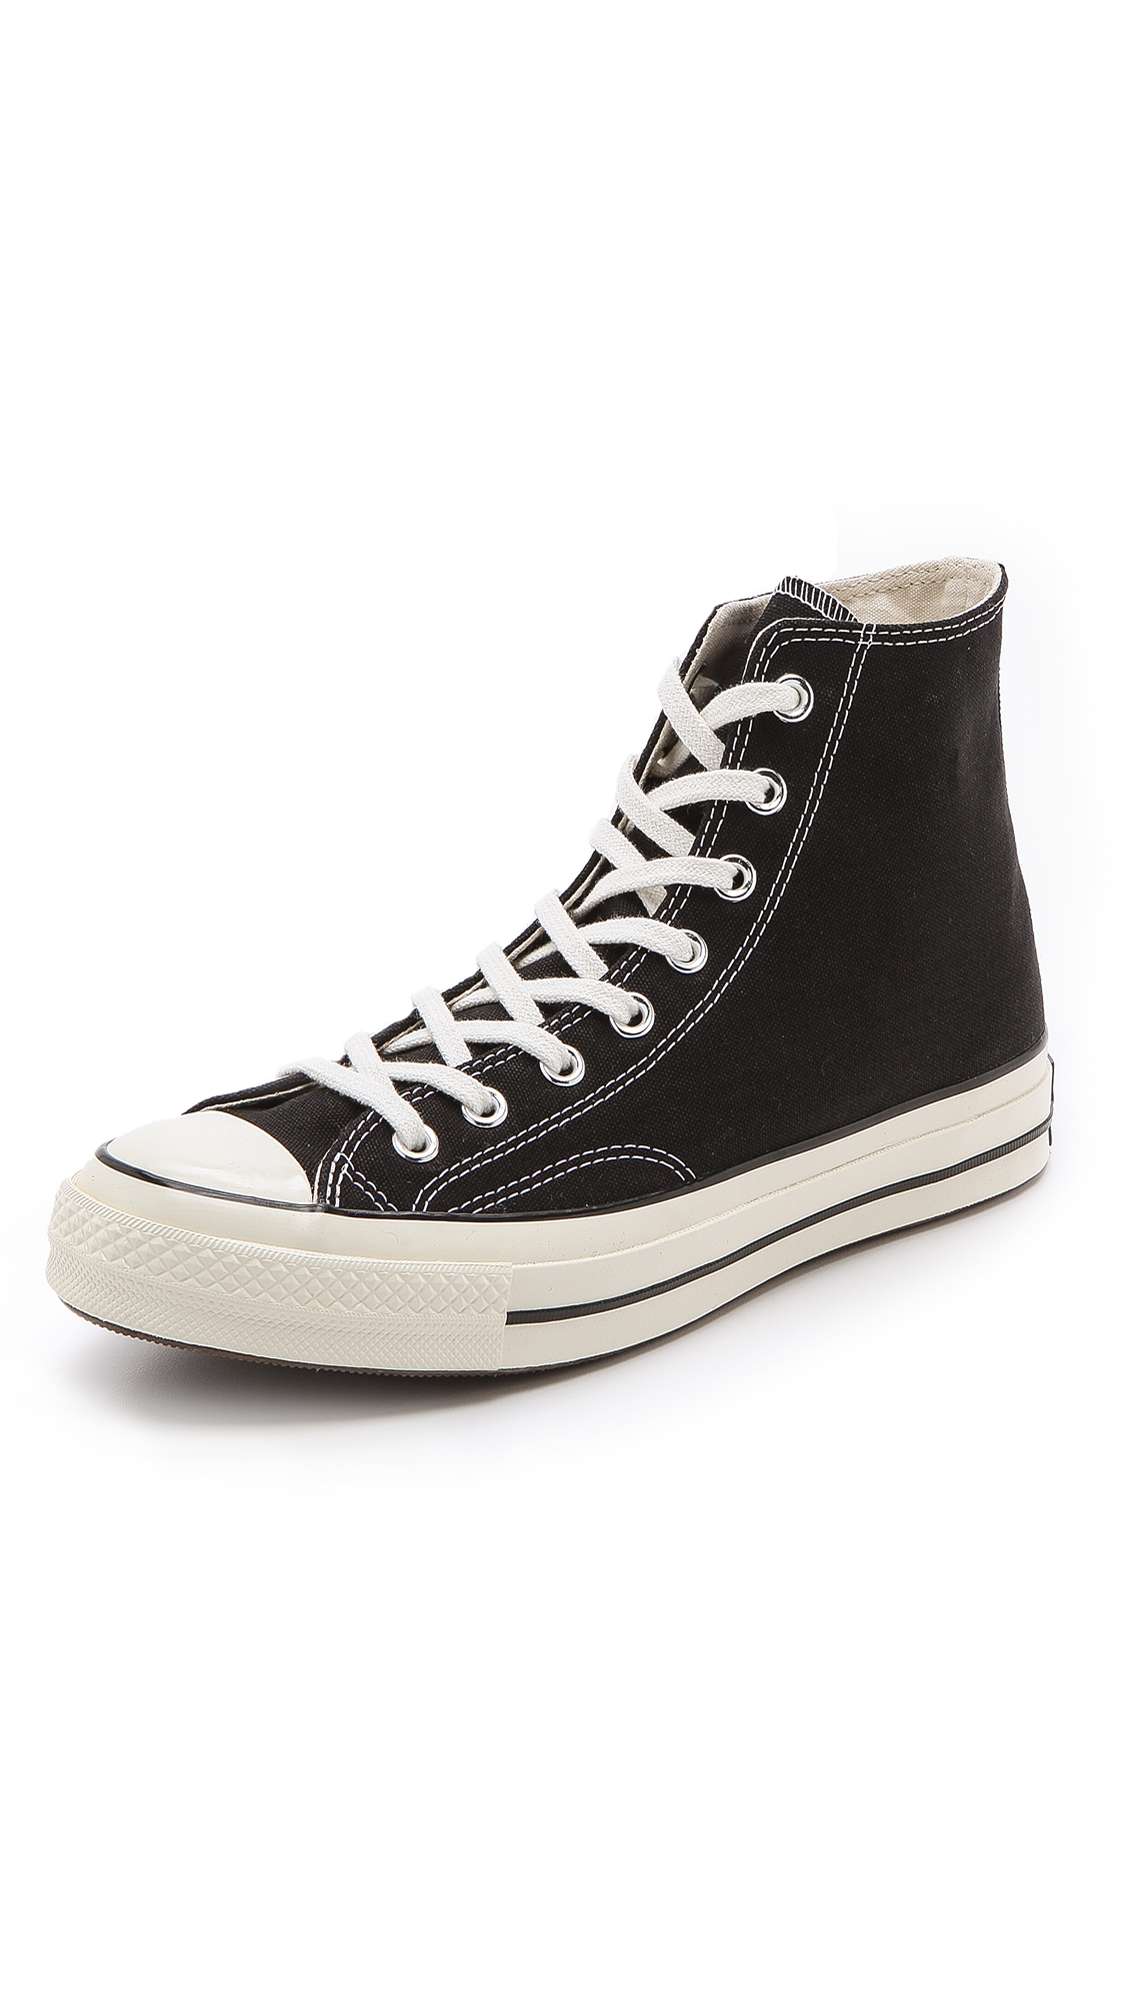 Converse Chuck Taylor All Star 70s High Top Sneakers in ...